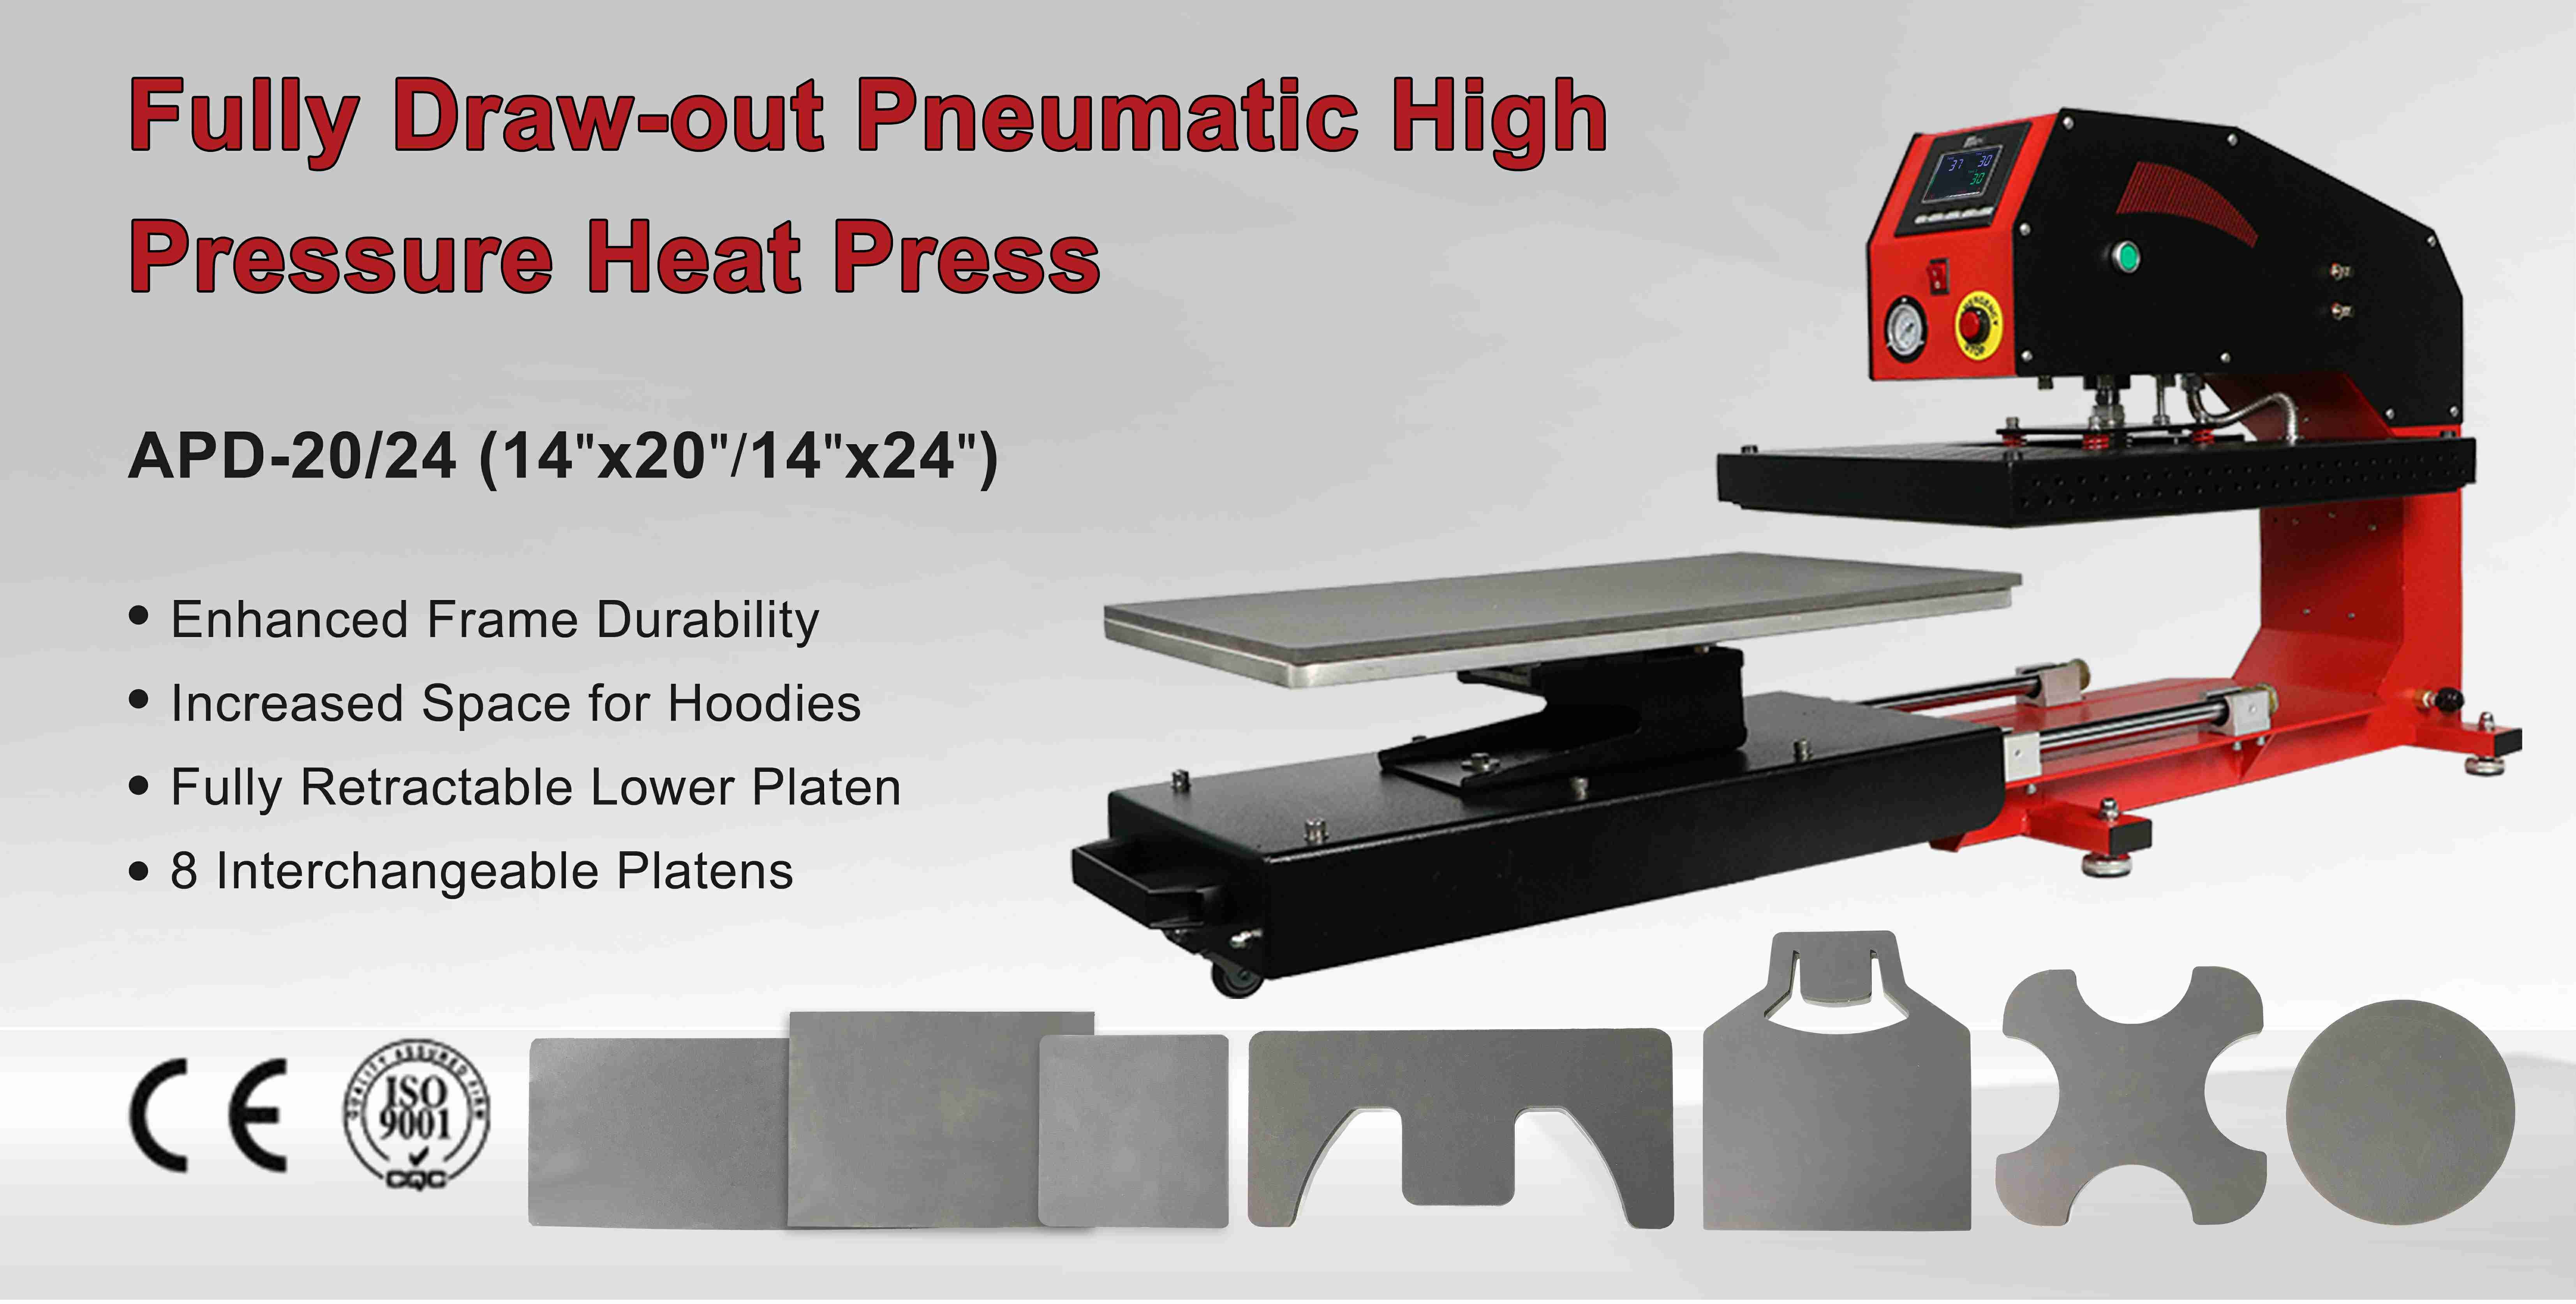 High-Performance APD Series Pneumatic Heat Press Machine for Professional Use | Microtec